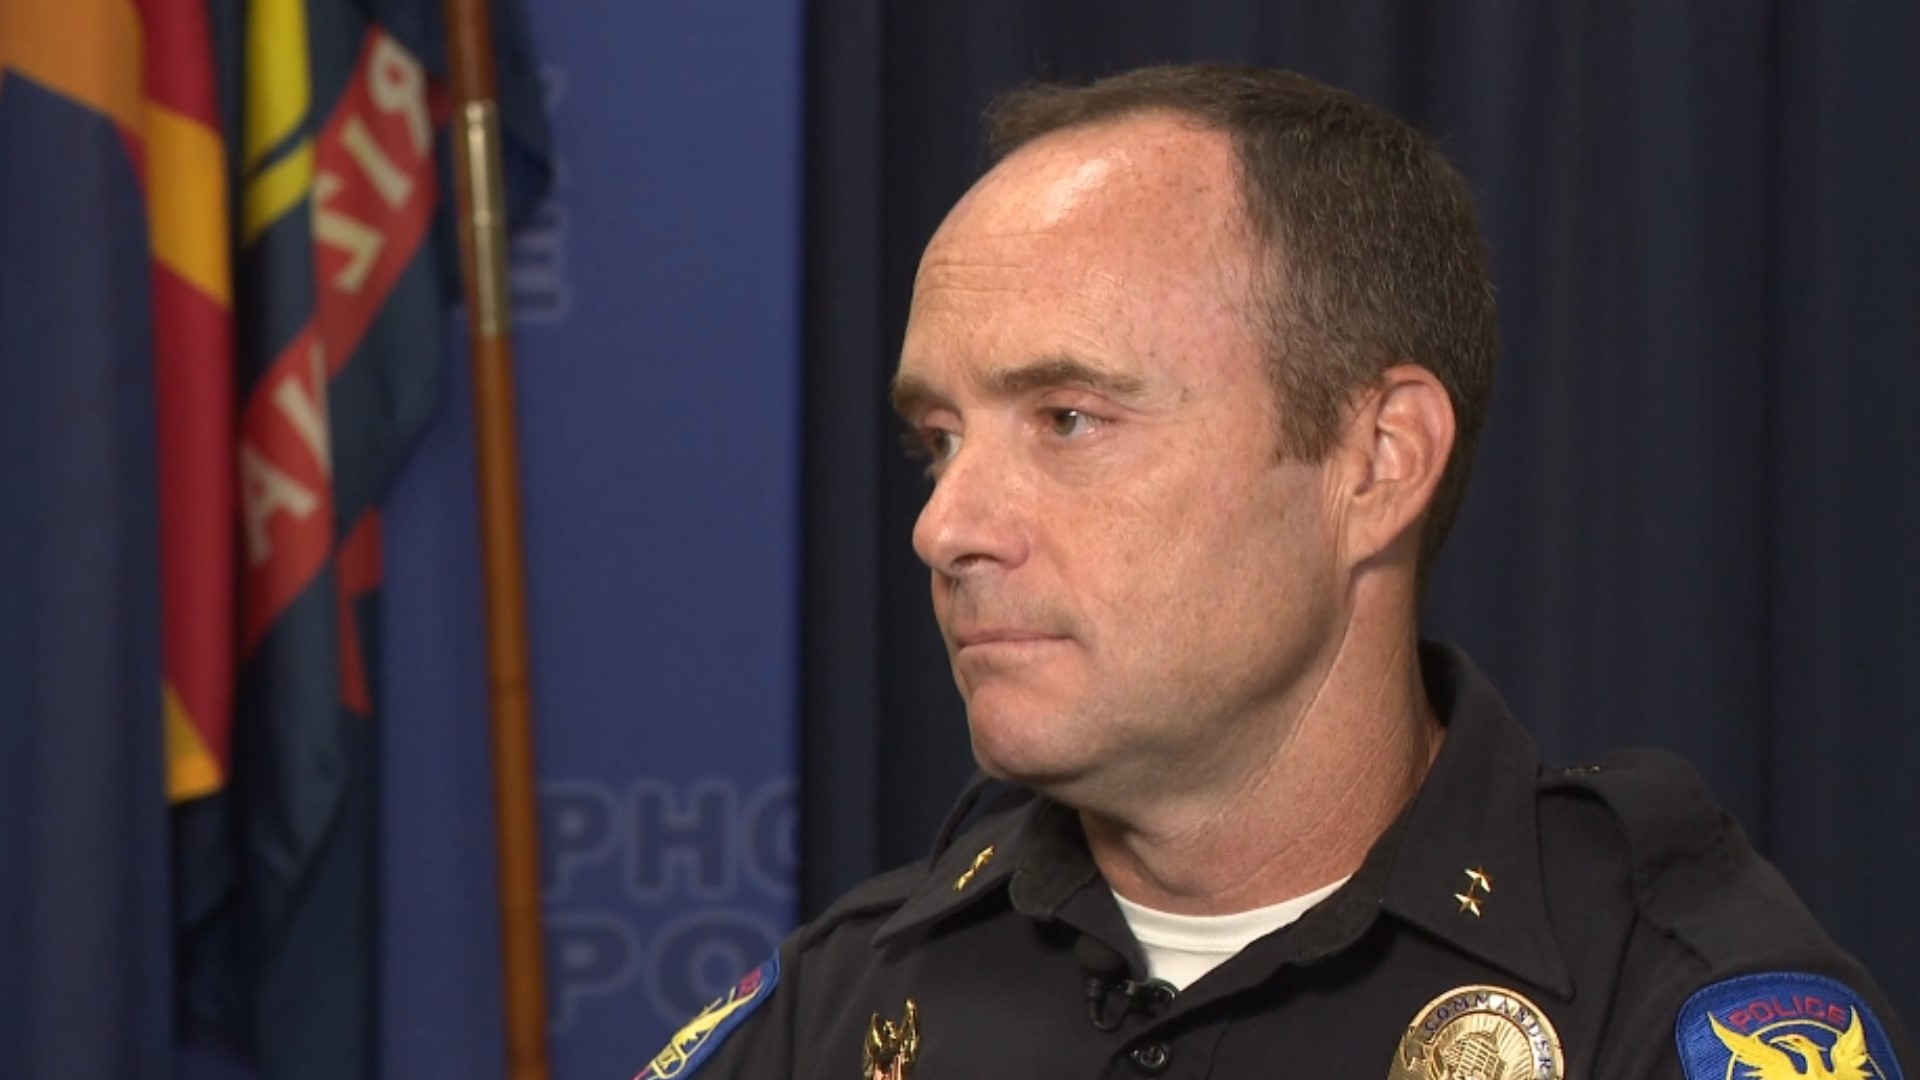 The commander says that while there has been some progress, he also shares that there is more to be done than what the police department has capacity to do.